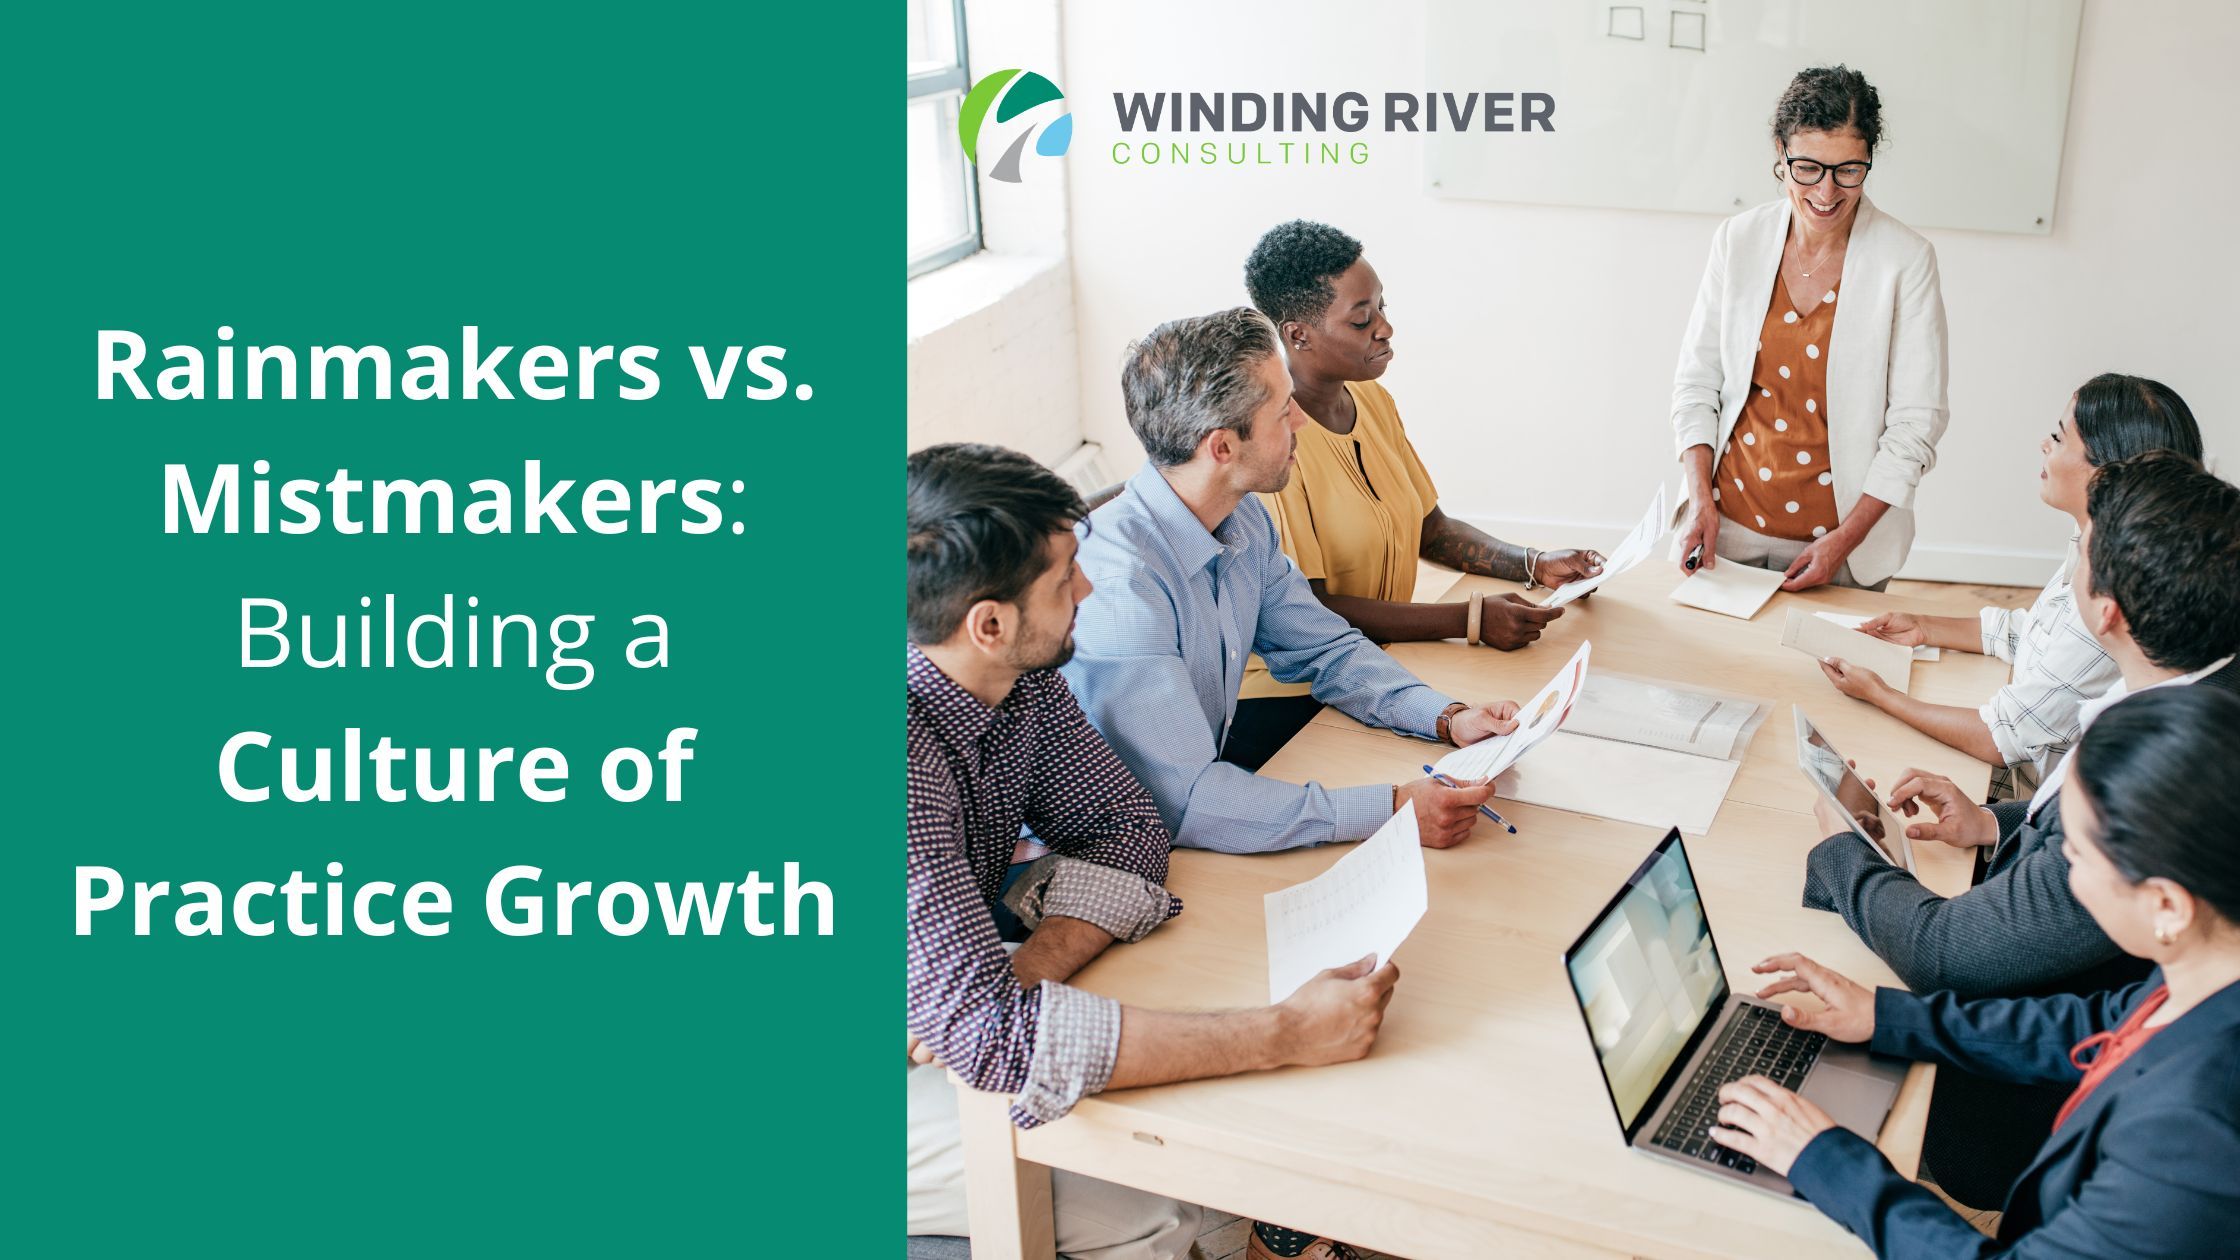 Rainmakers vs. Mistmakers: Building a Culture of Practice Growth